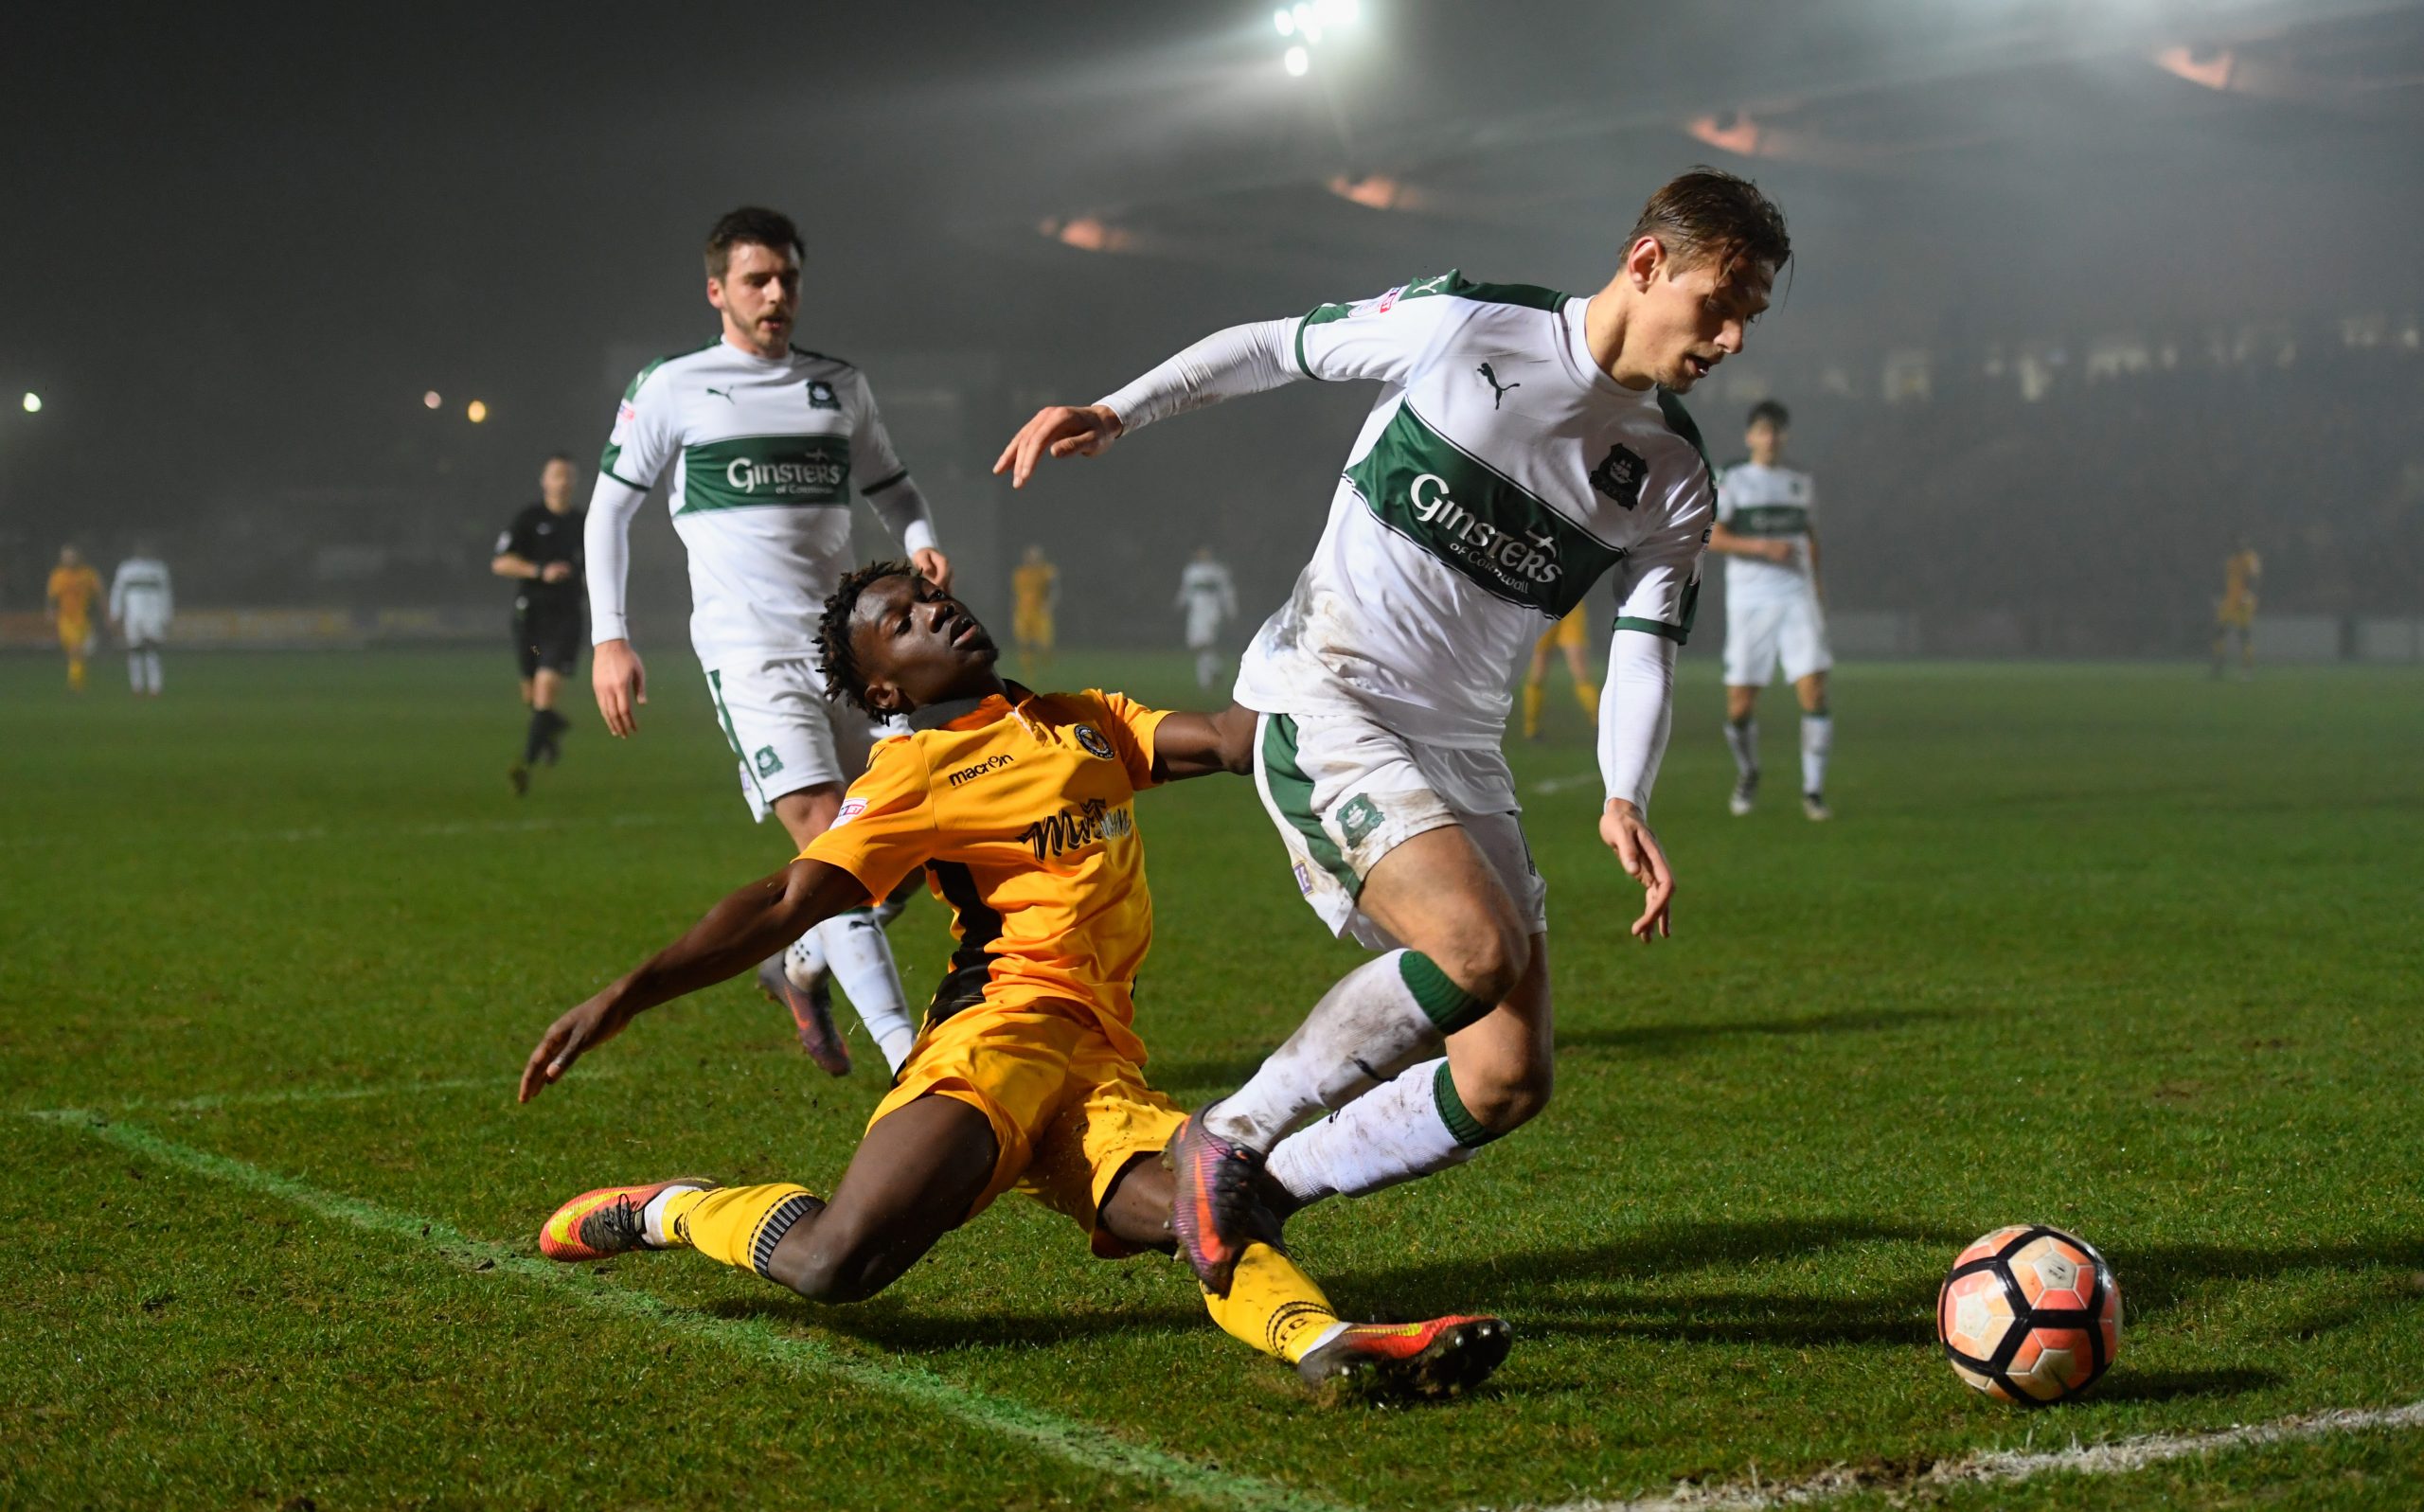 Newport County v Plymouth Argyle - The Emirates FA Cup Second Round Replay